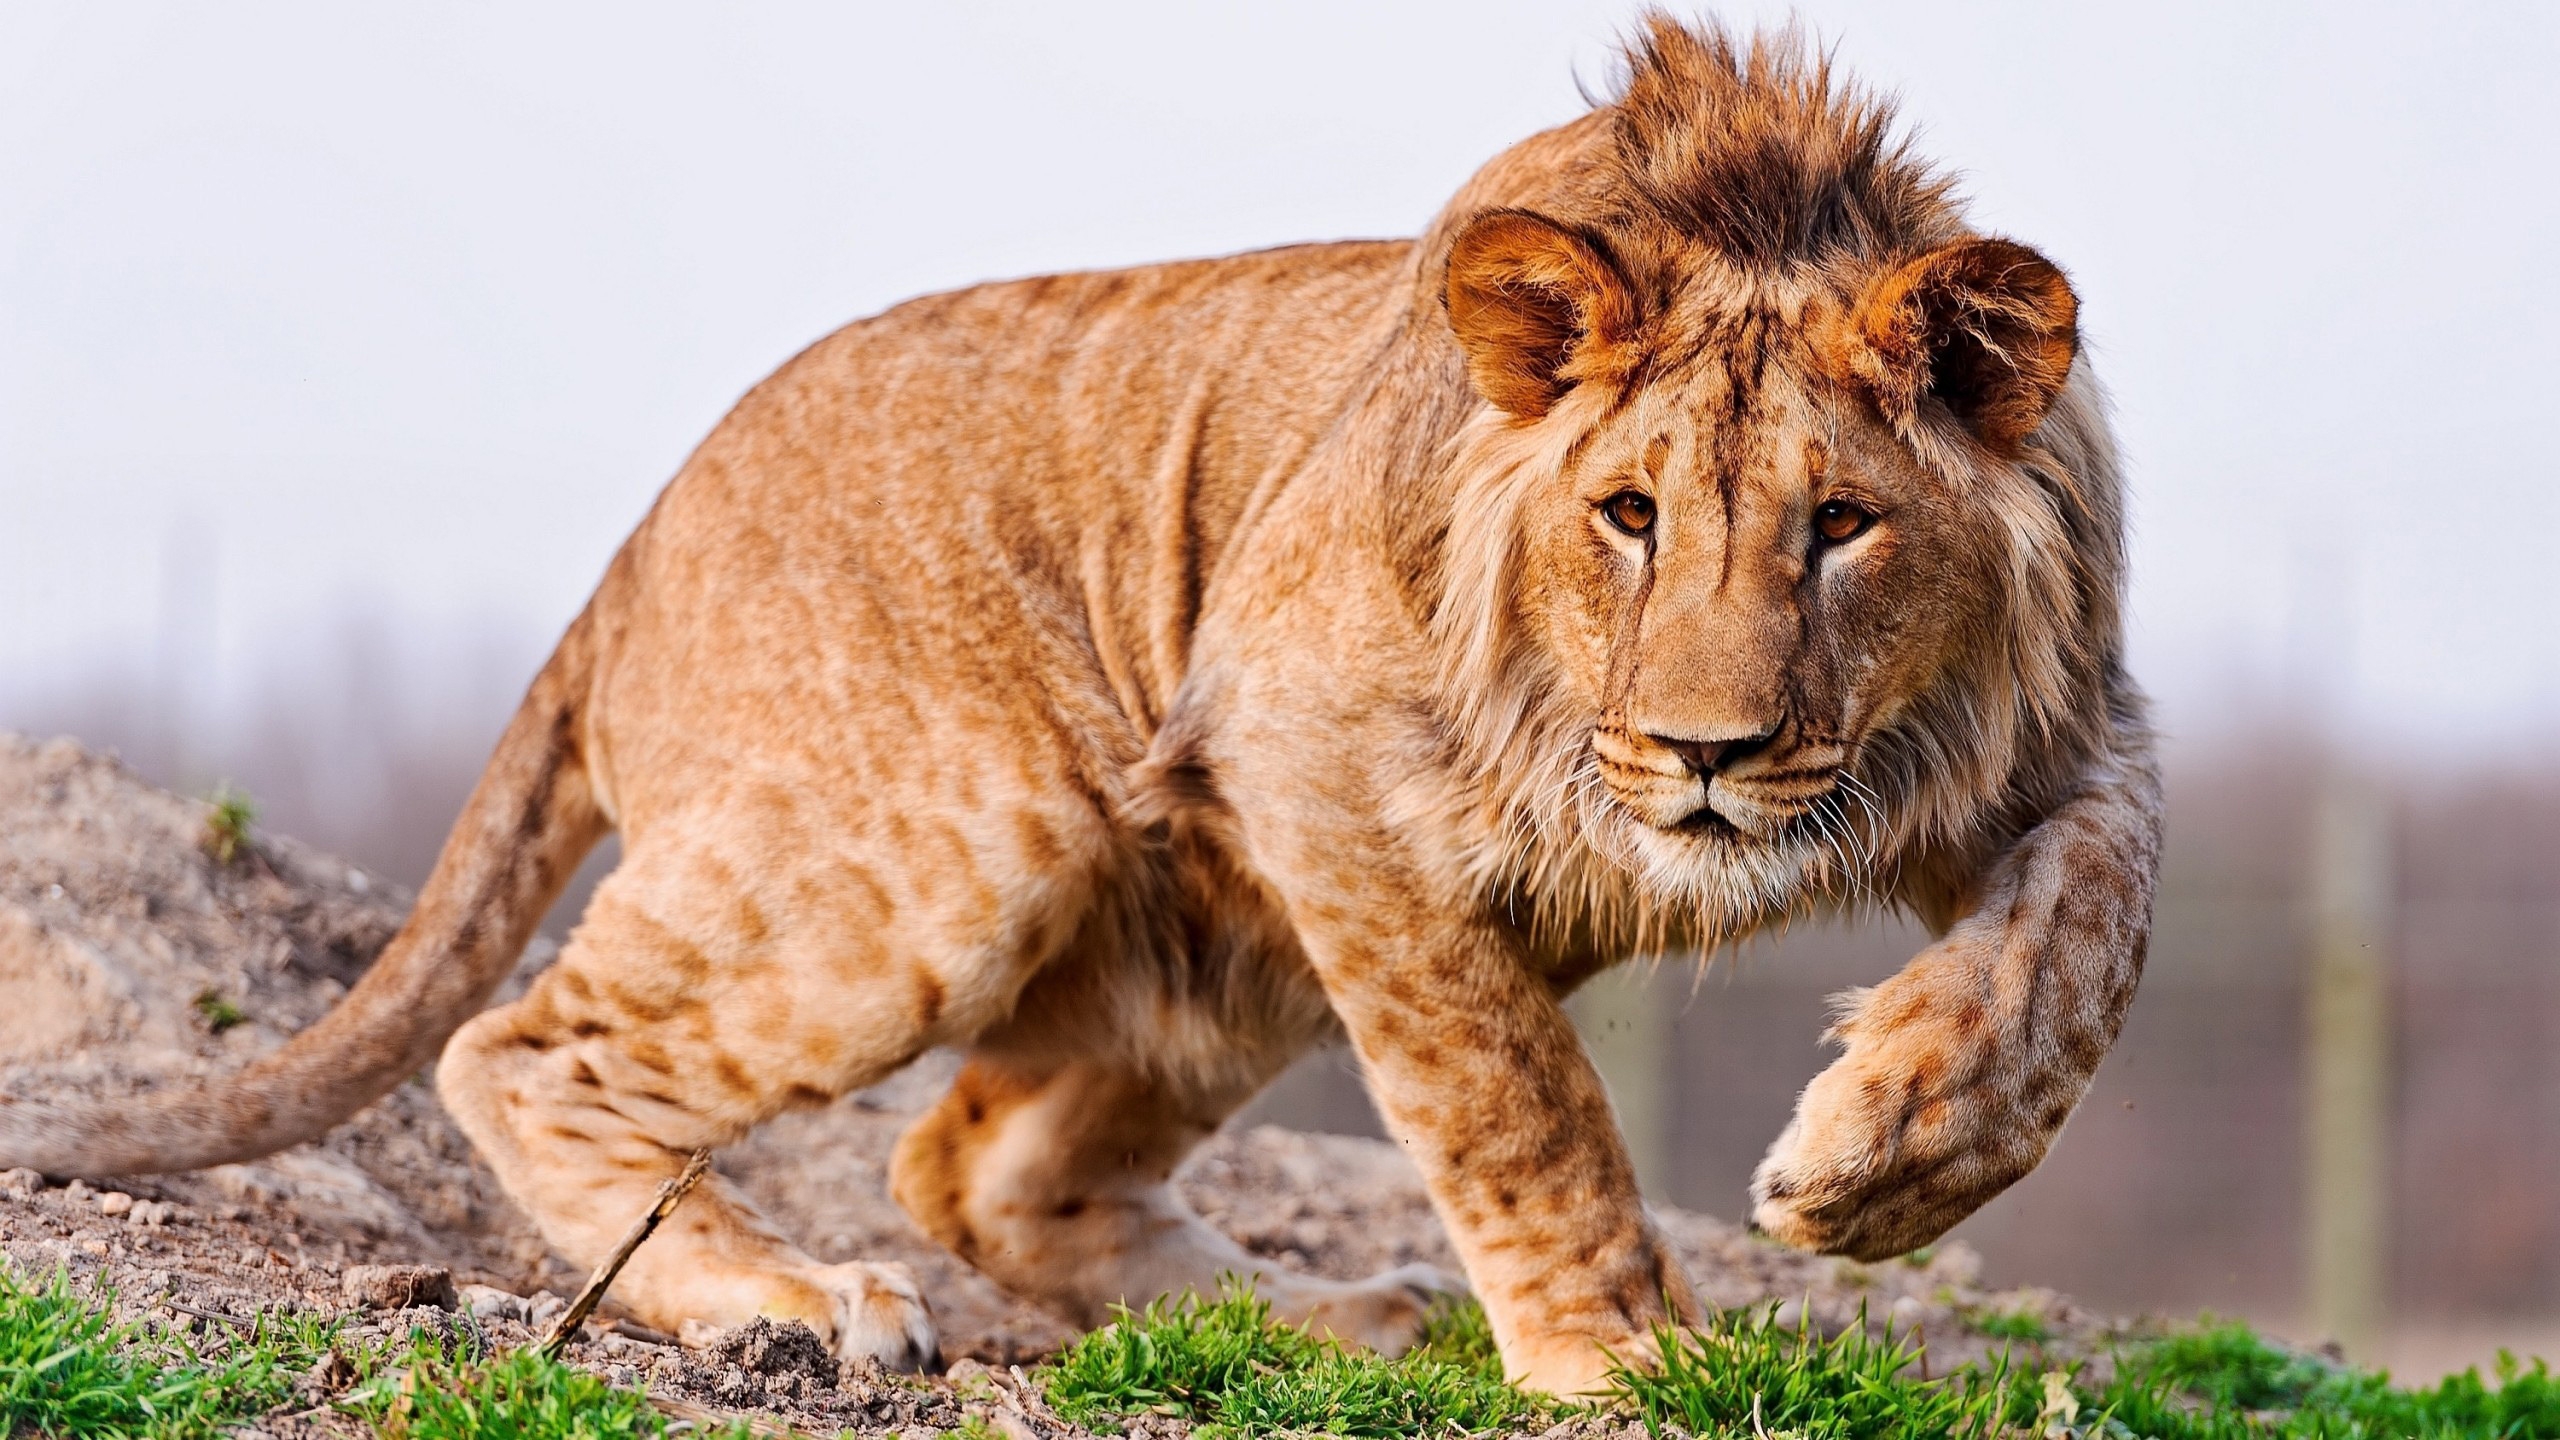 Amazing Young Lion for 2560x1440 HDTV resolution